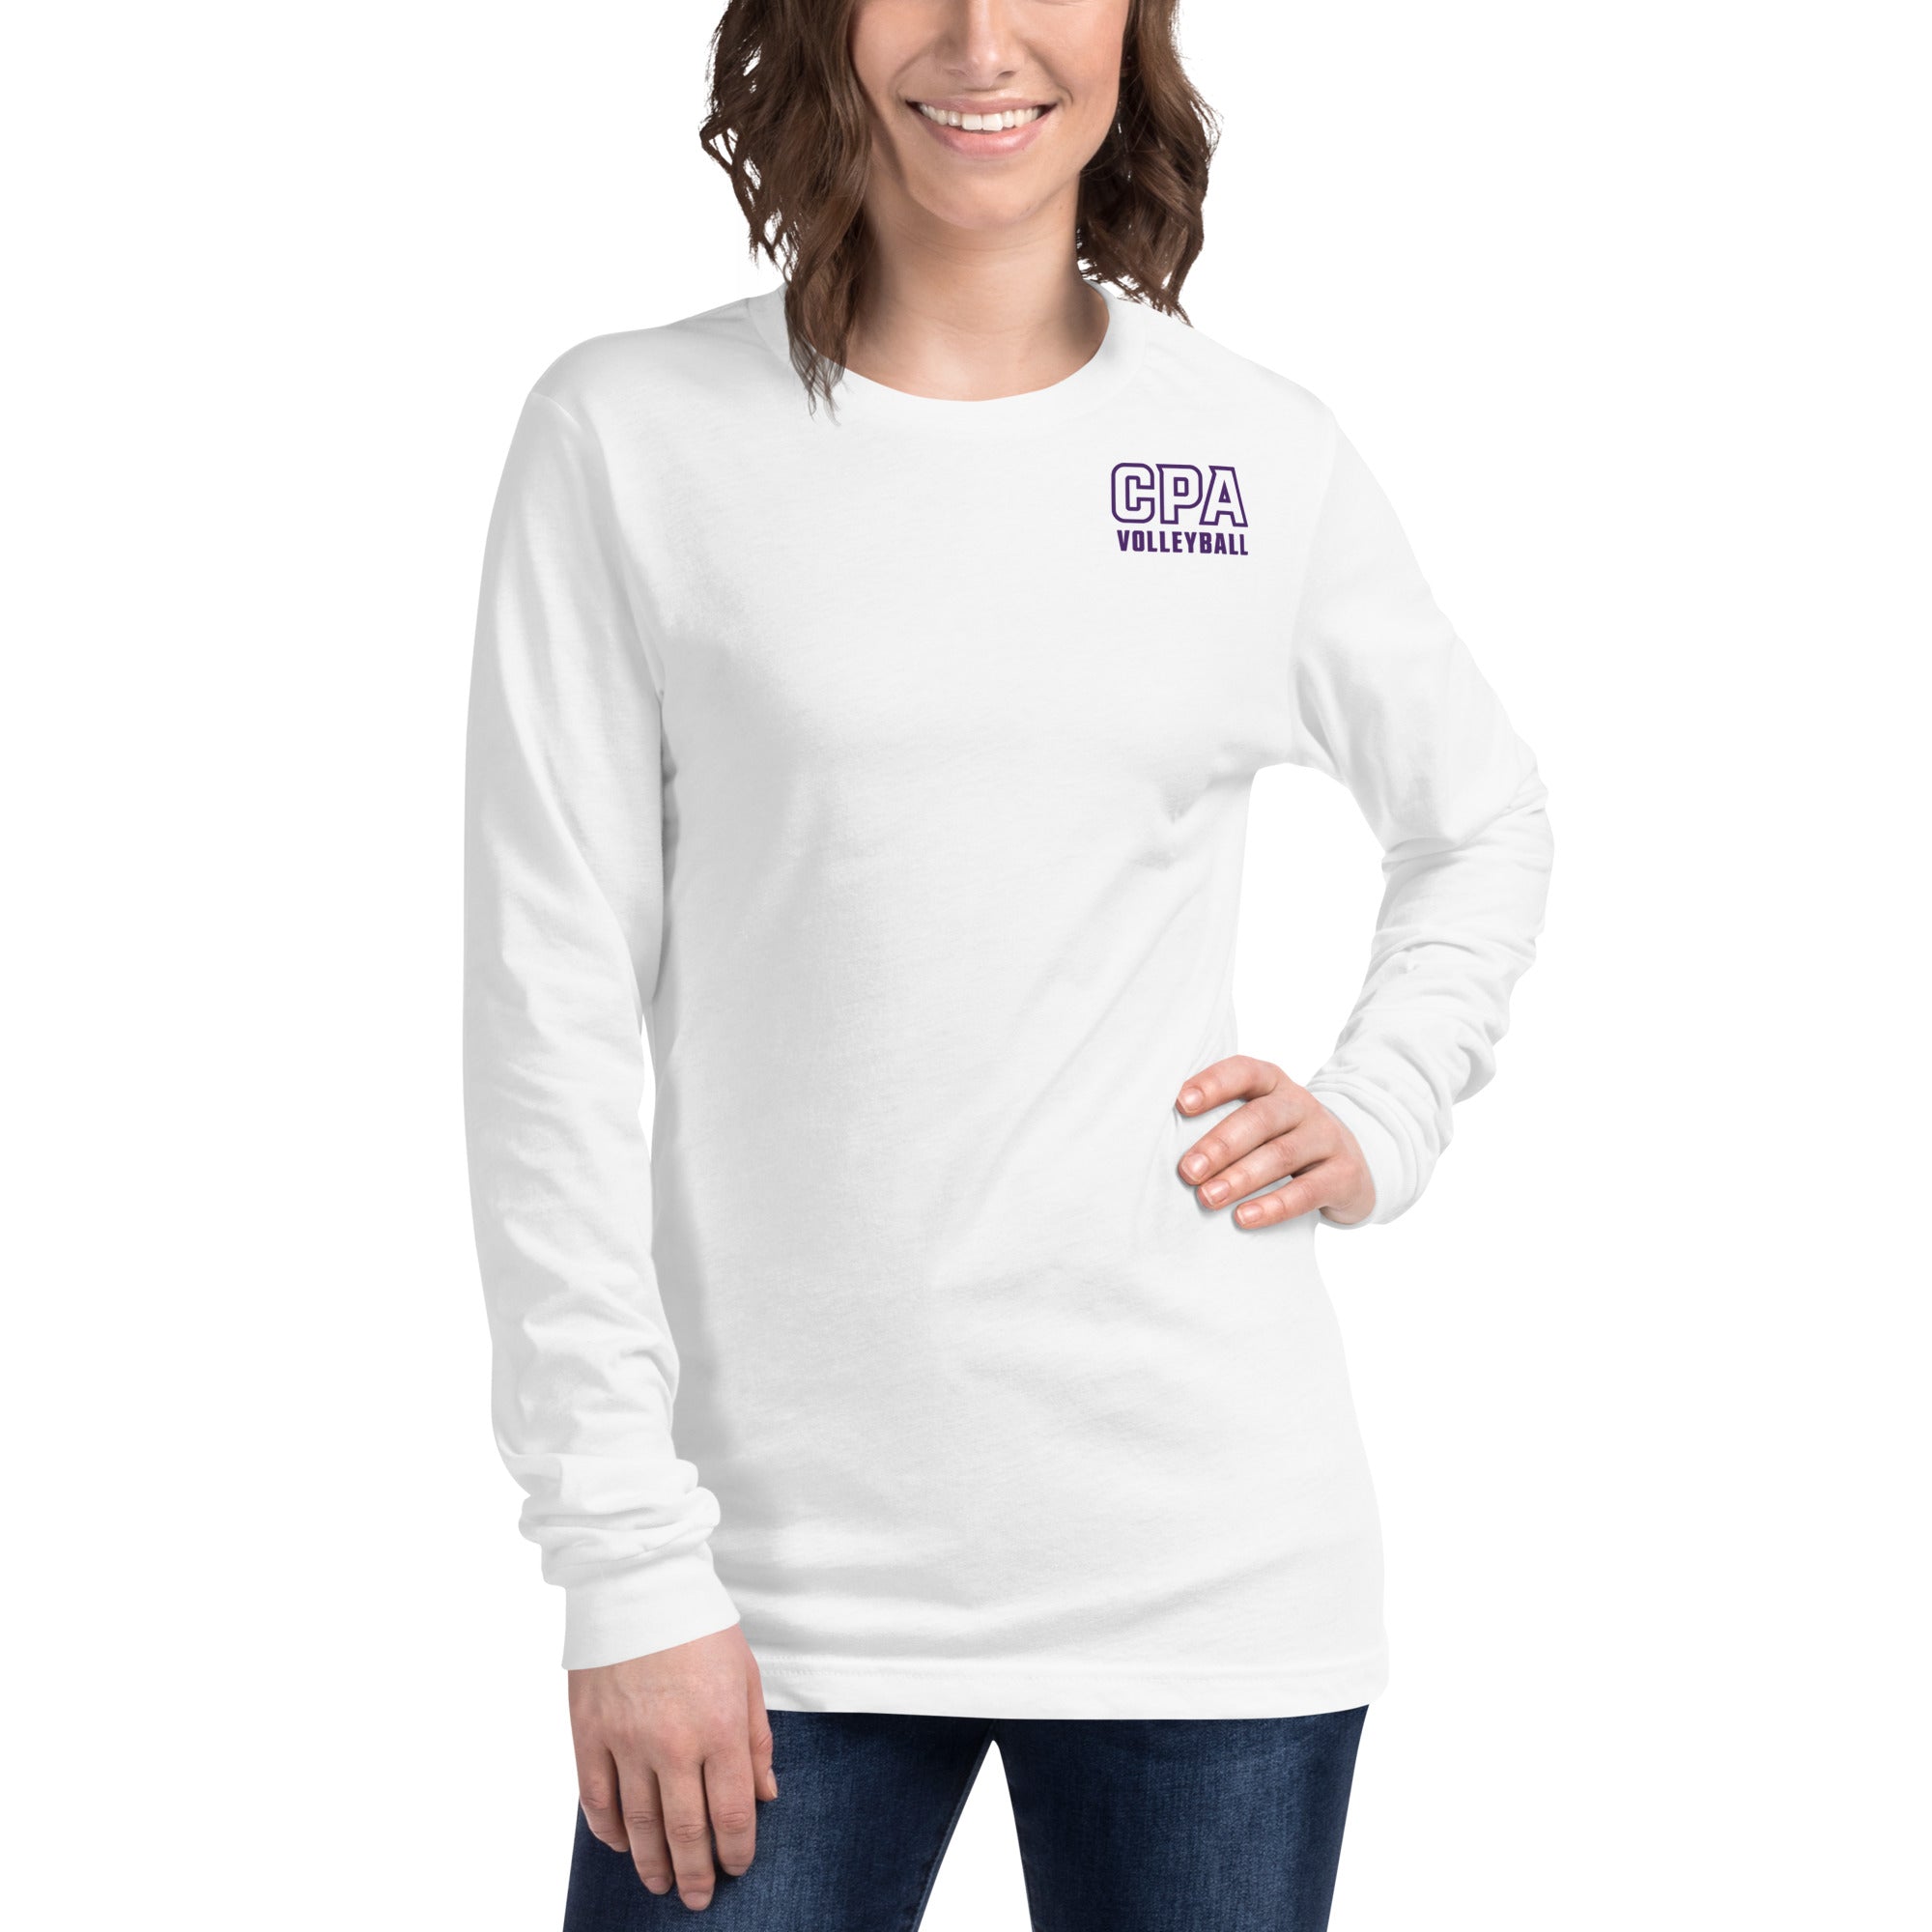 CPA Volleyball | Unisex Long Sleeve Tee - Bella + Canvas 3501